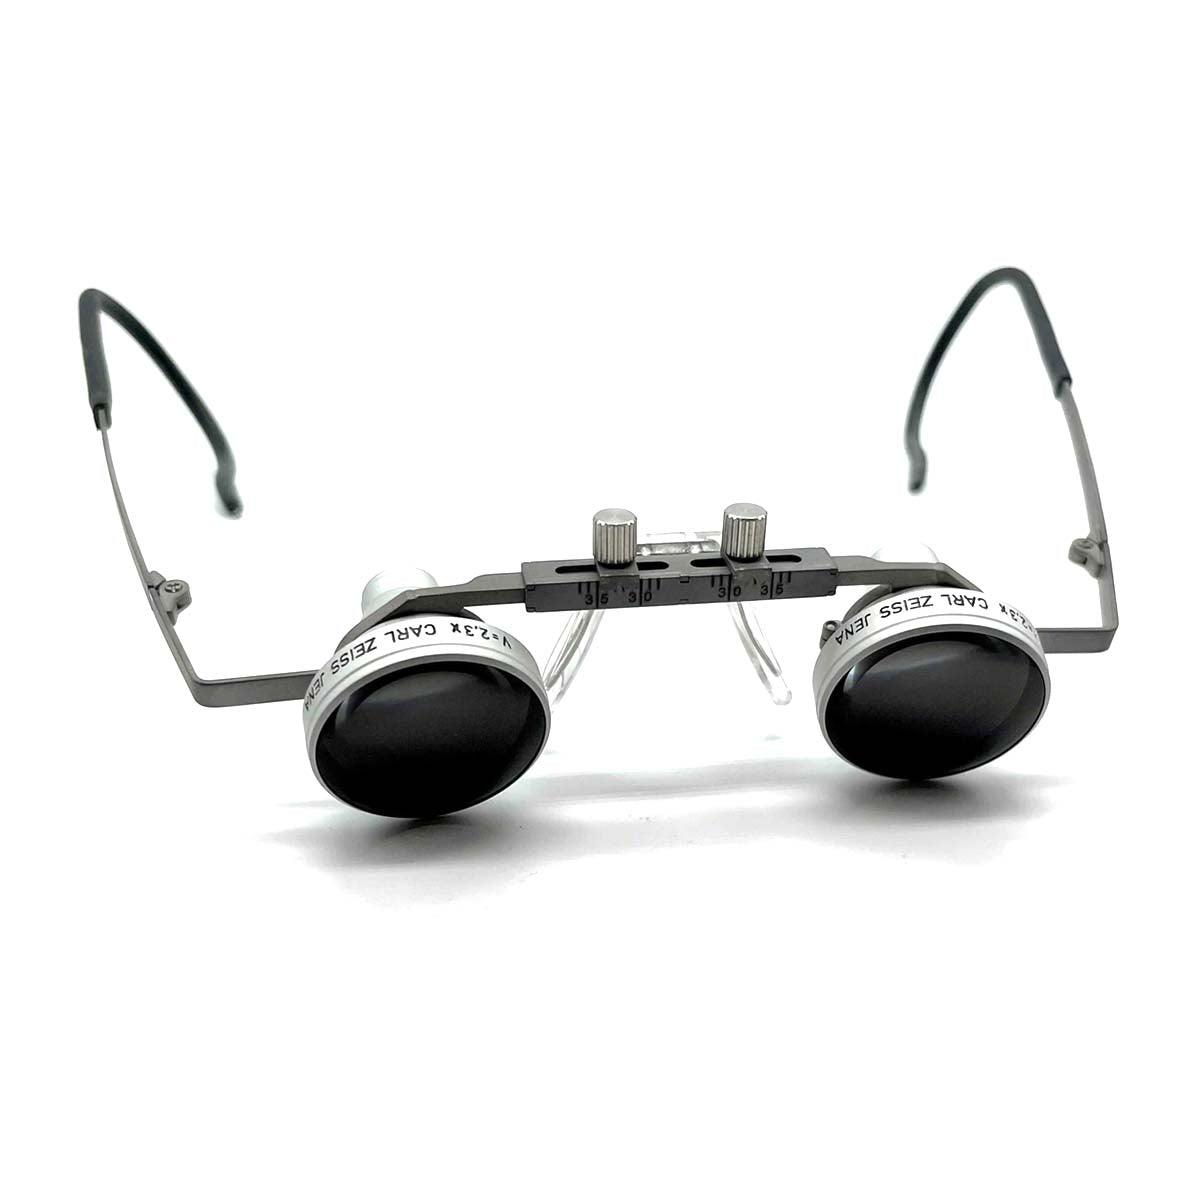 Magnifier with Five Lenses and LED Light - RioGrande